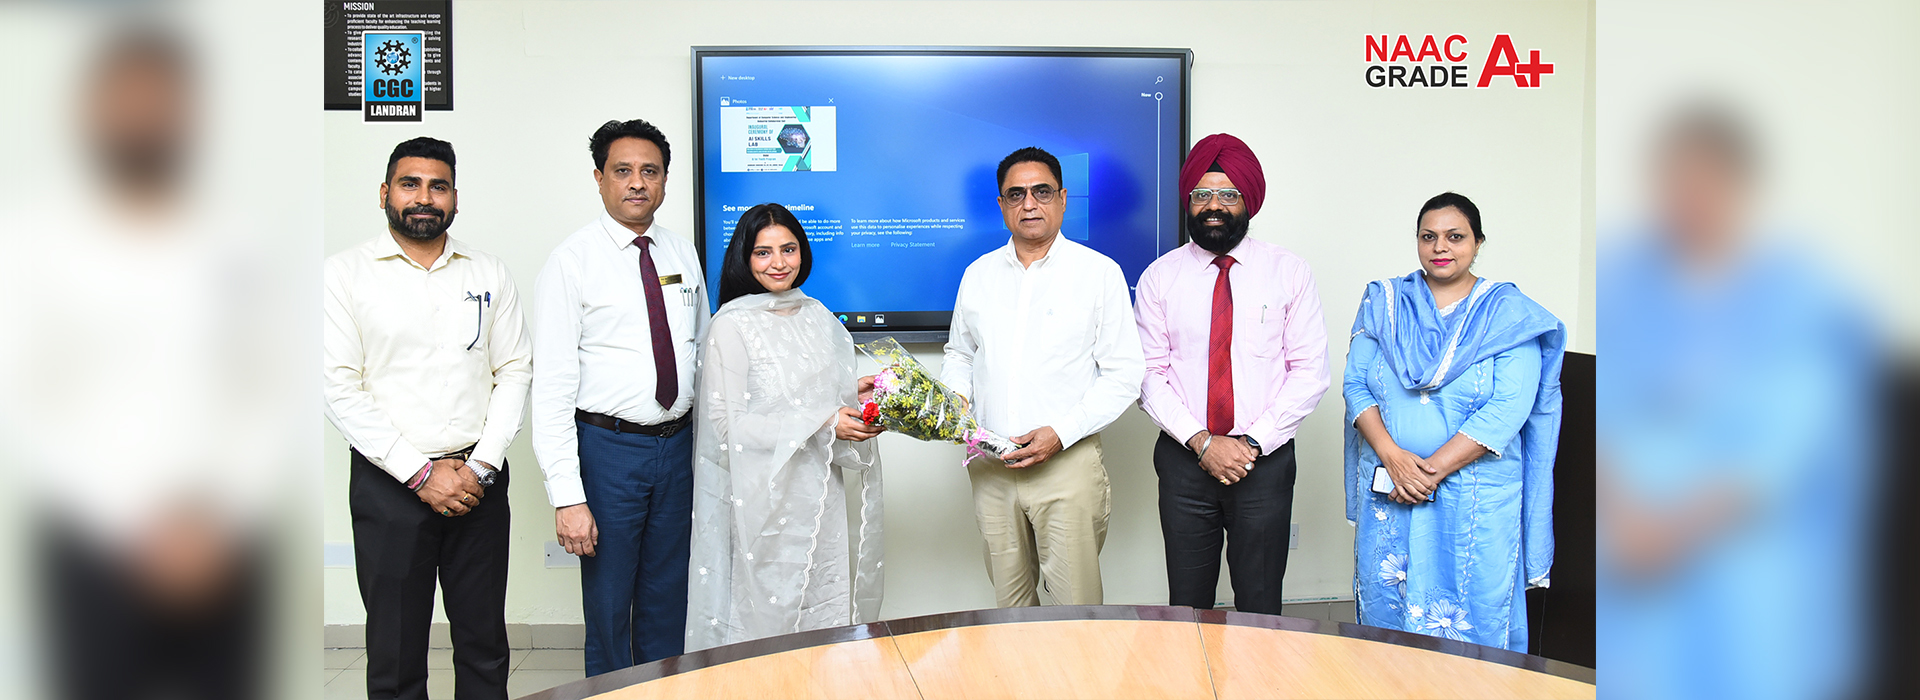 Landran Campus Inaugurates Centre of Excellence for AI Skills in Collaboration with Intel and Dell Technologies, Spearheading Technological Innovation 